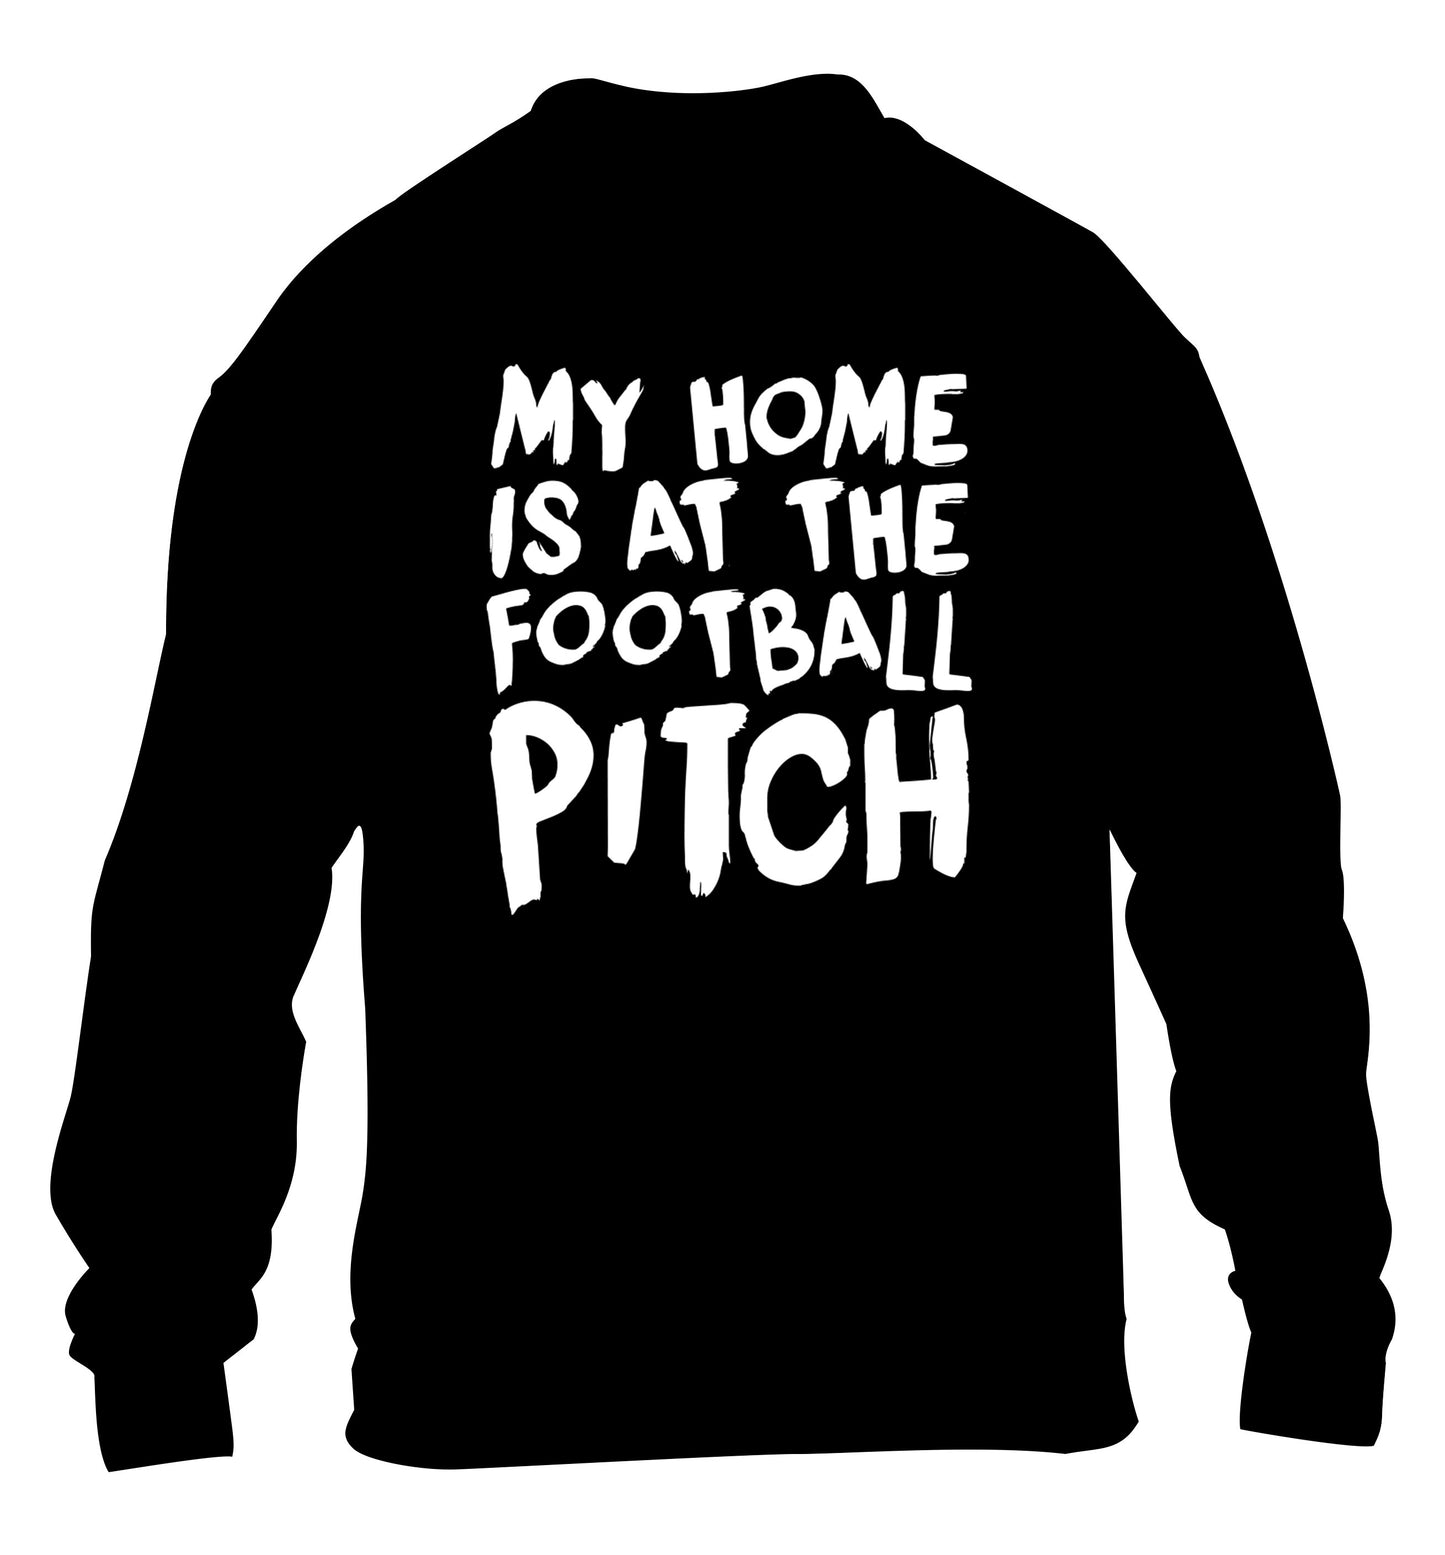 My home is at the football pitch children's black sweater 12-14 Years